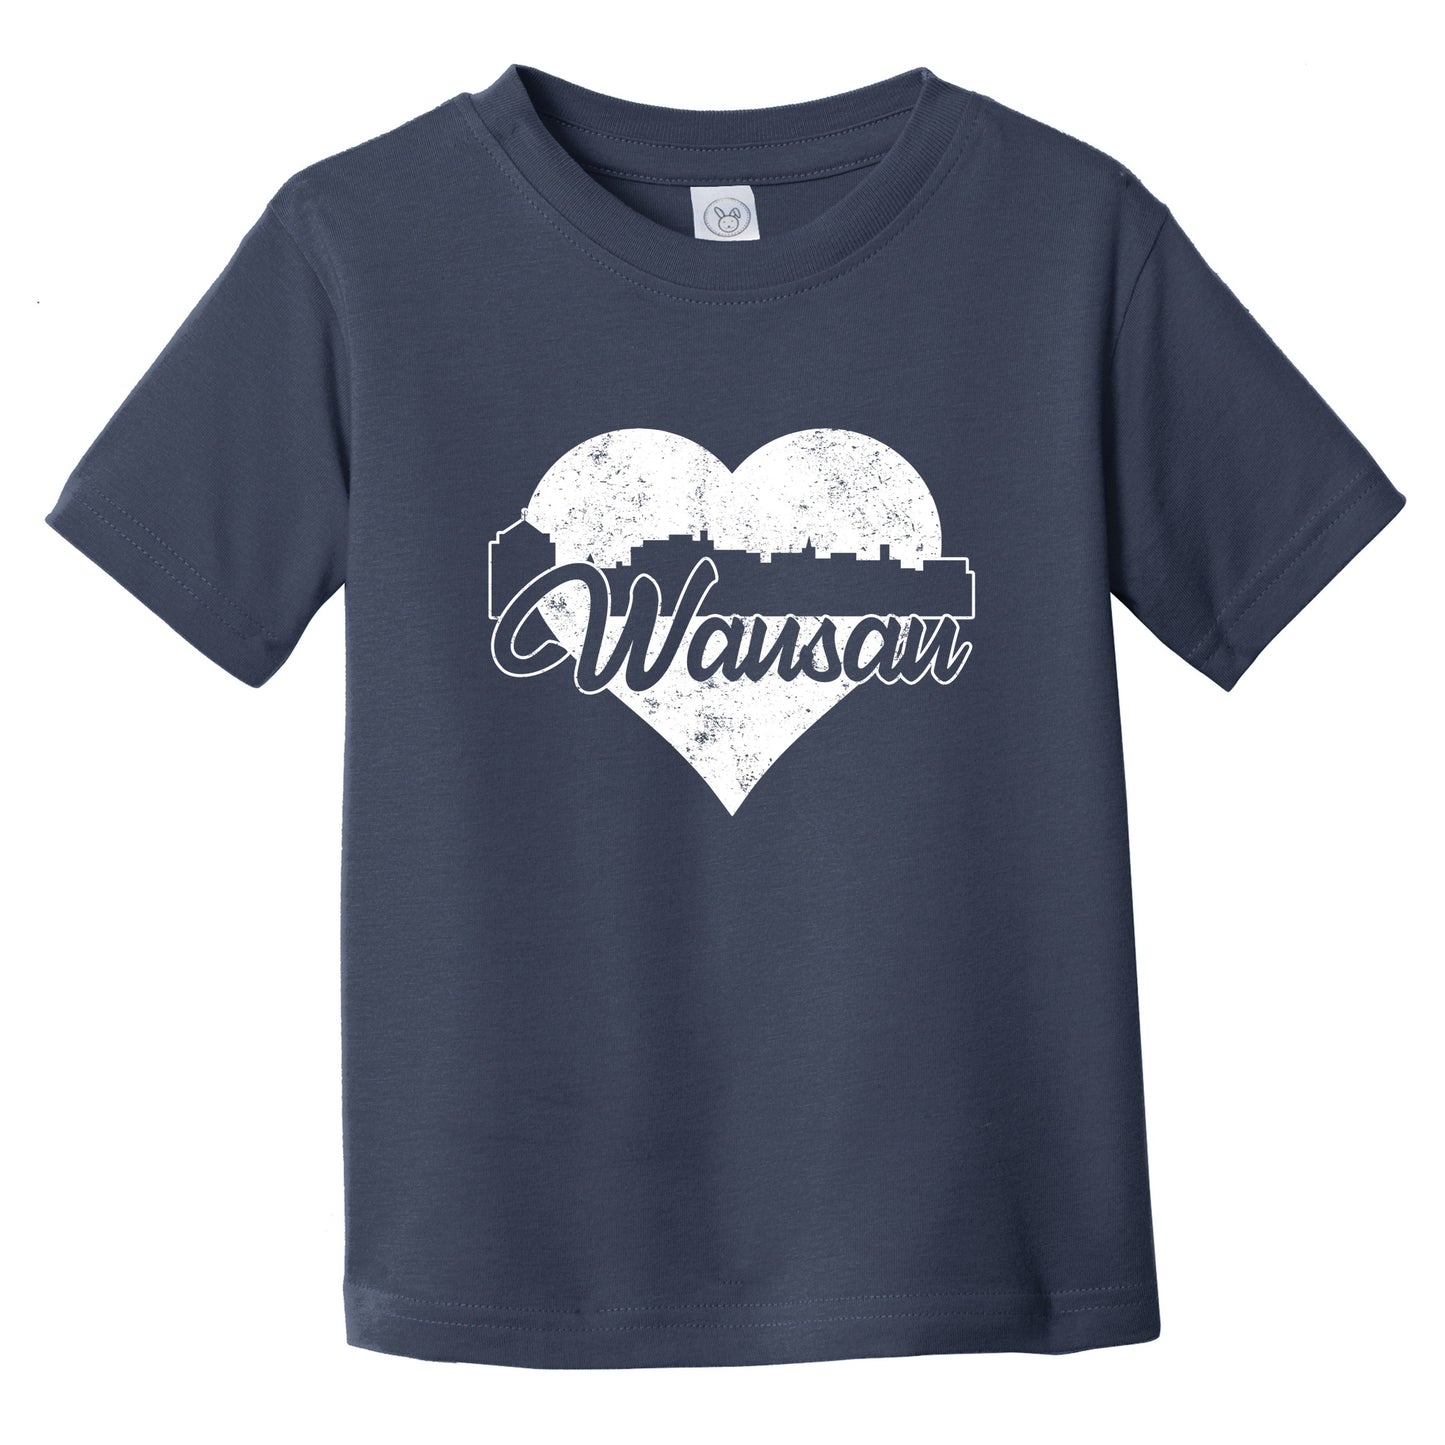 Retro Wausau Wisconsin Skyline Heart Distressed Infant Toddler T-Shirt